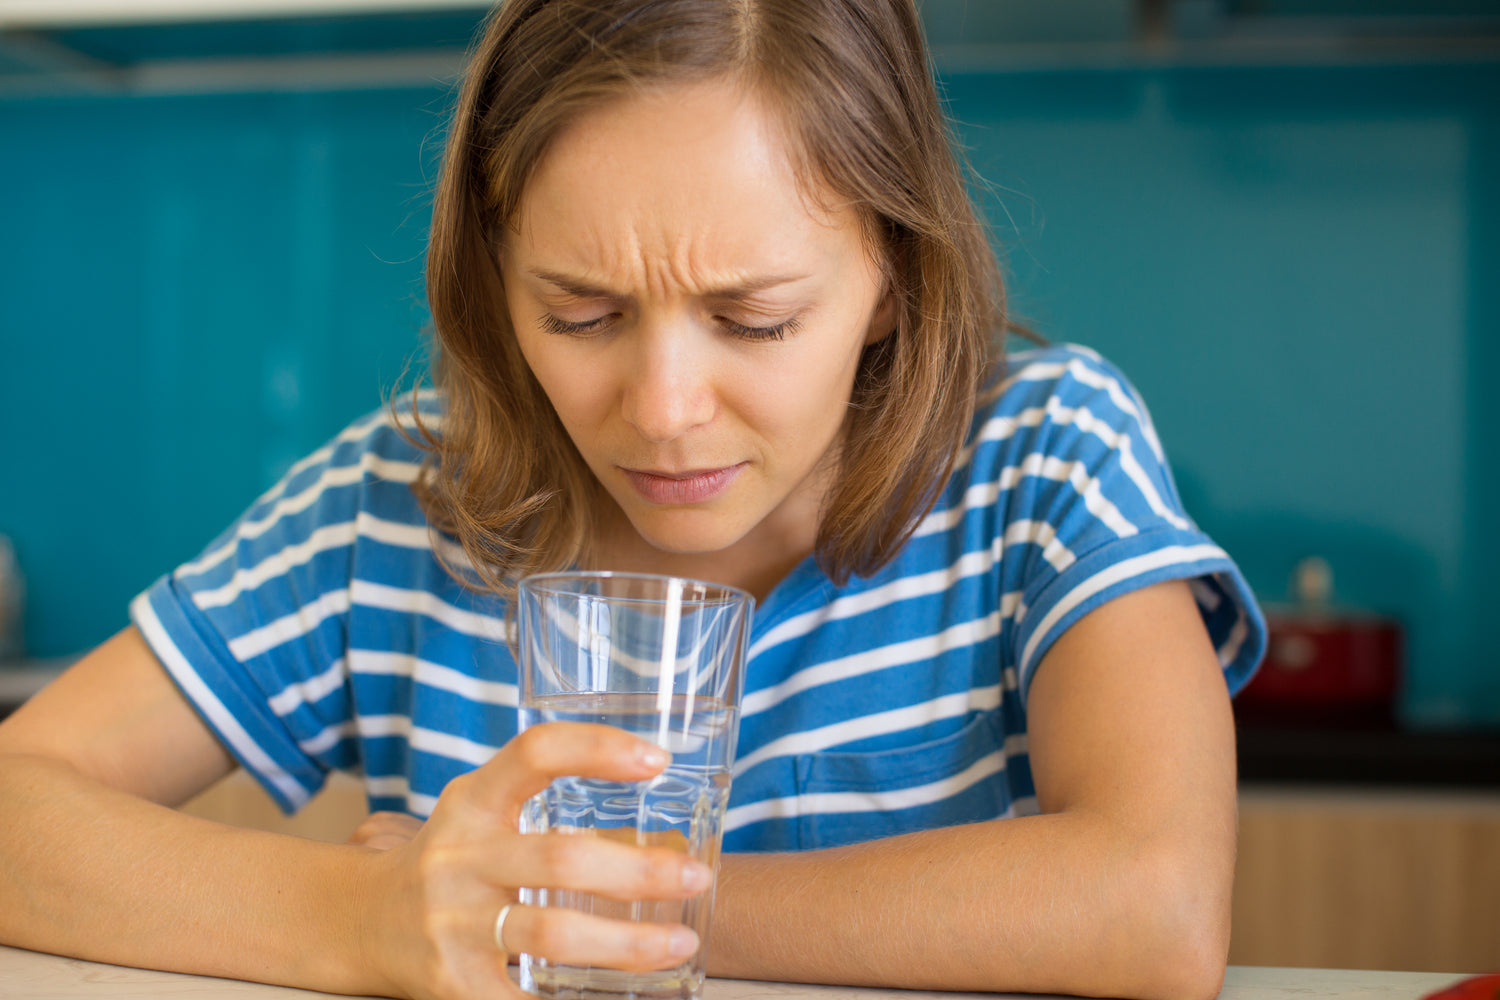 Woman looking at a glass of water with concern.